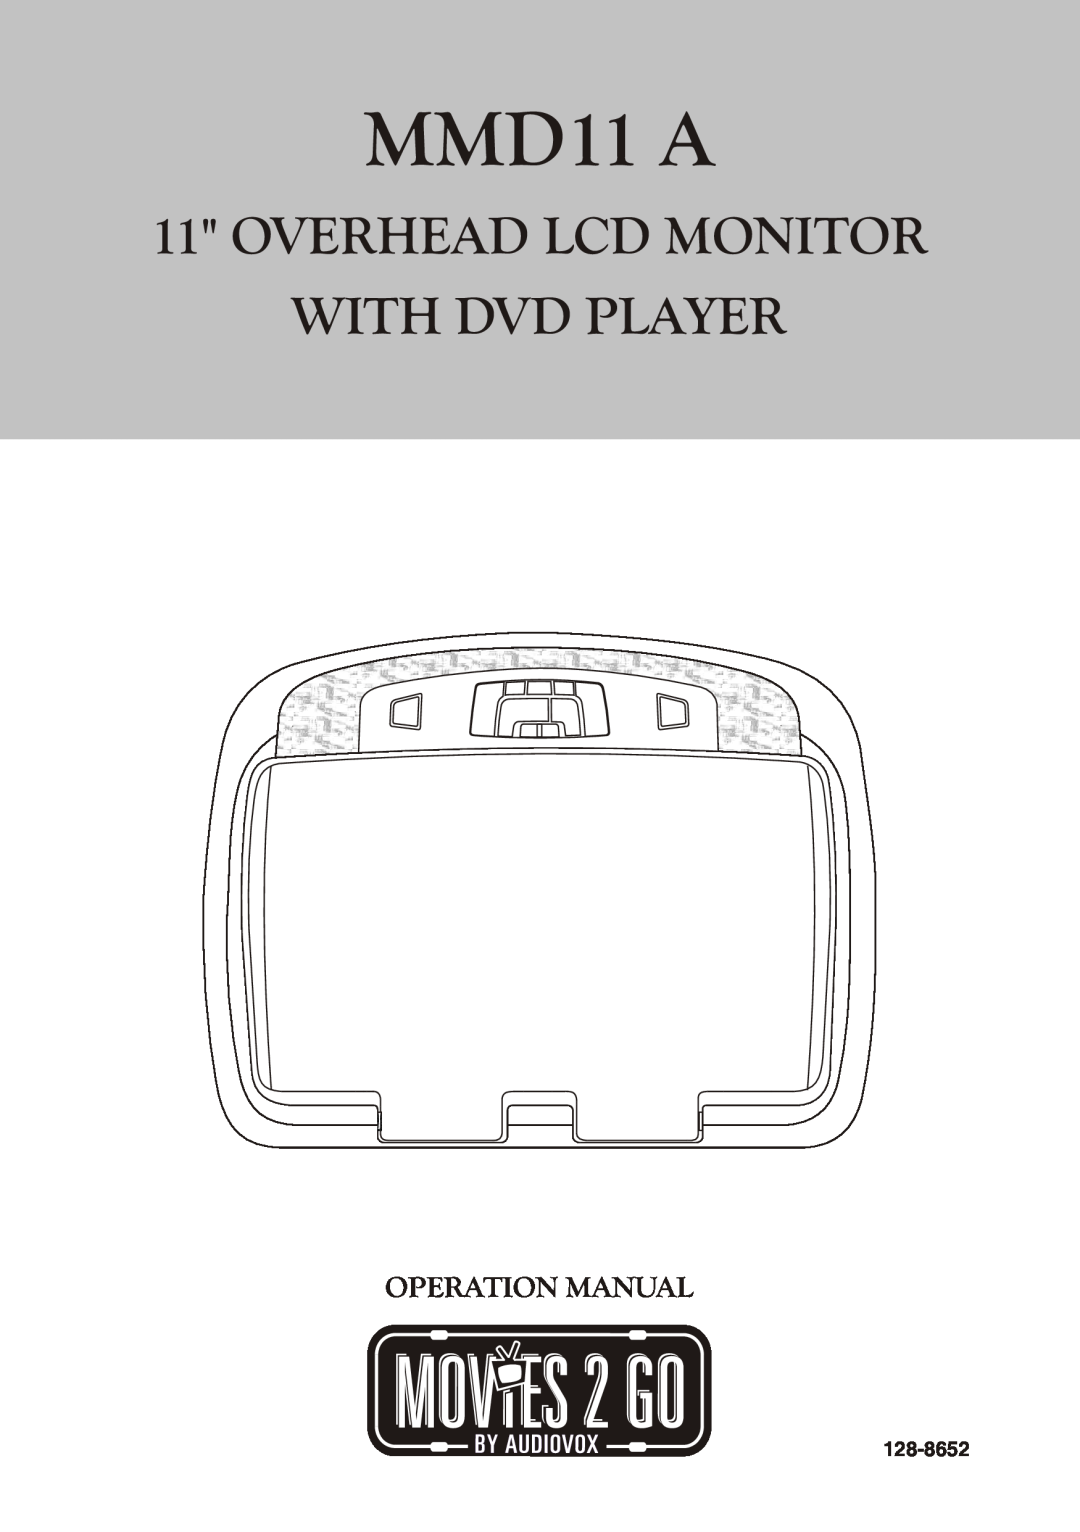 Audiovox MMD11A operation manual MMD11 A, Overhead Lcd Monitor With Dvd Player, Operation Manual, 128-8652 